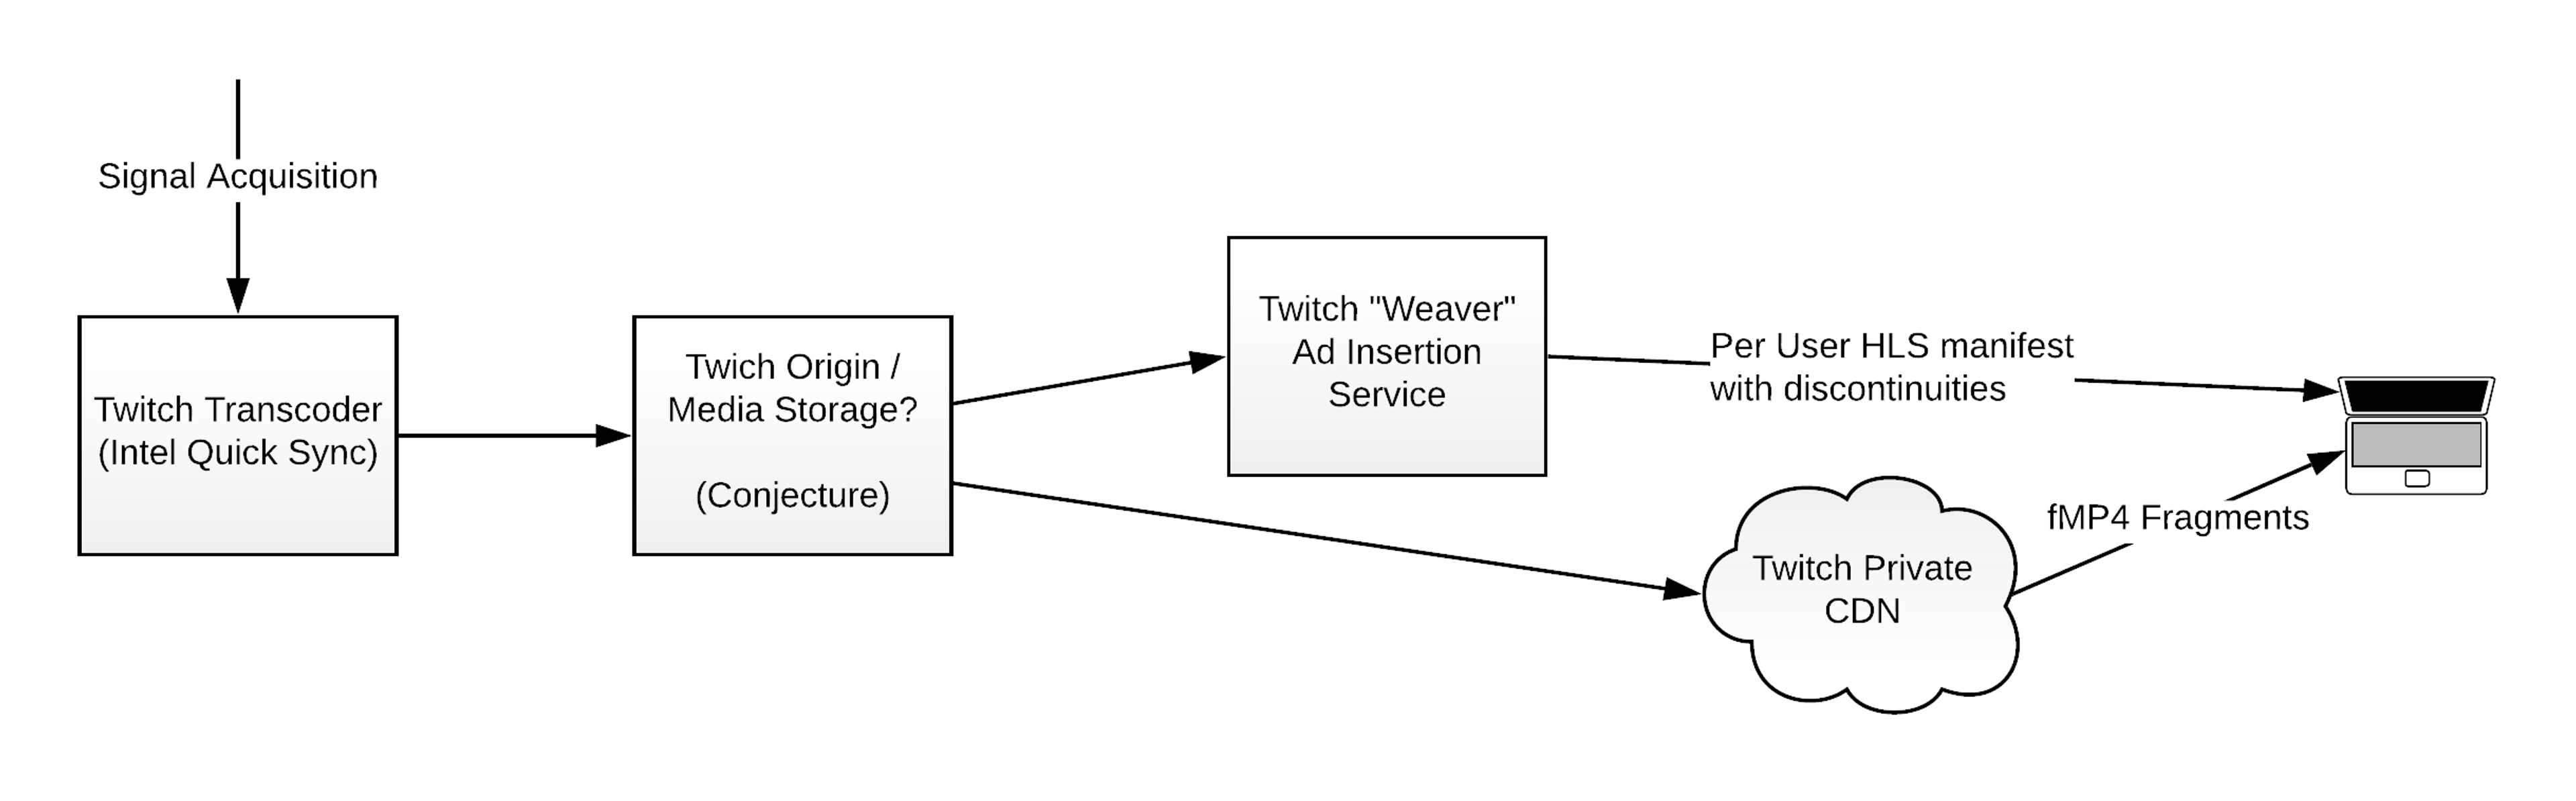 A block diagramming outlining a hypothetical architecture for Twitch